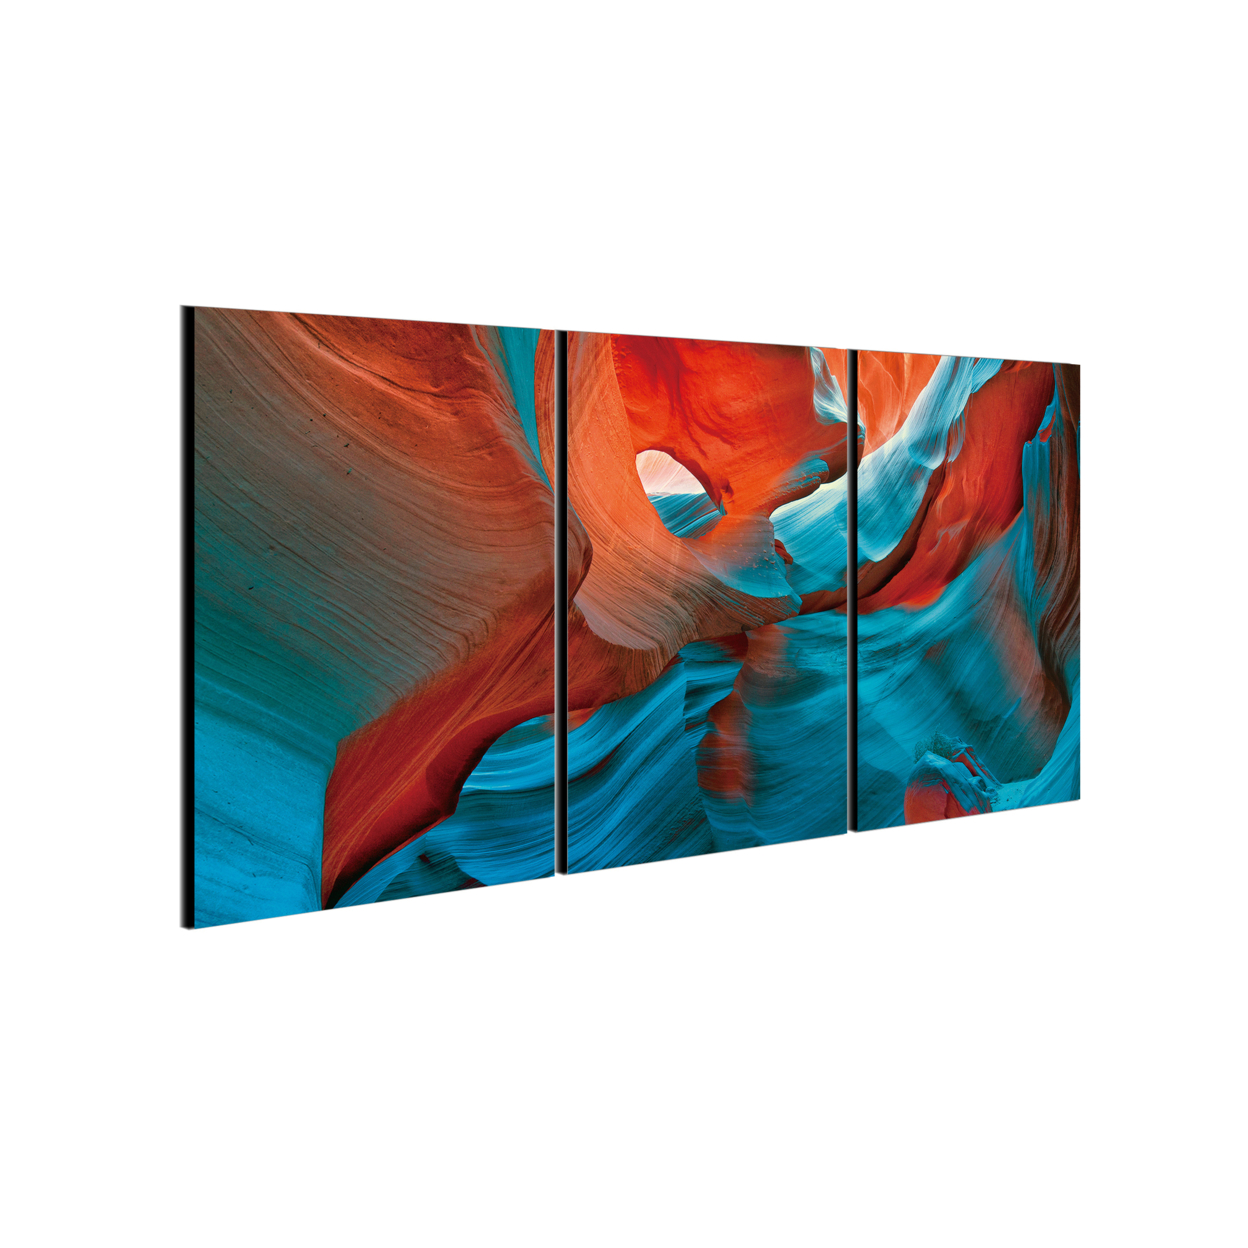 Enigma 3 Piece Wrapped Canvas Wall Art Print 20x40.5 Inches